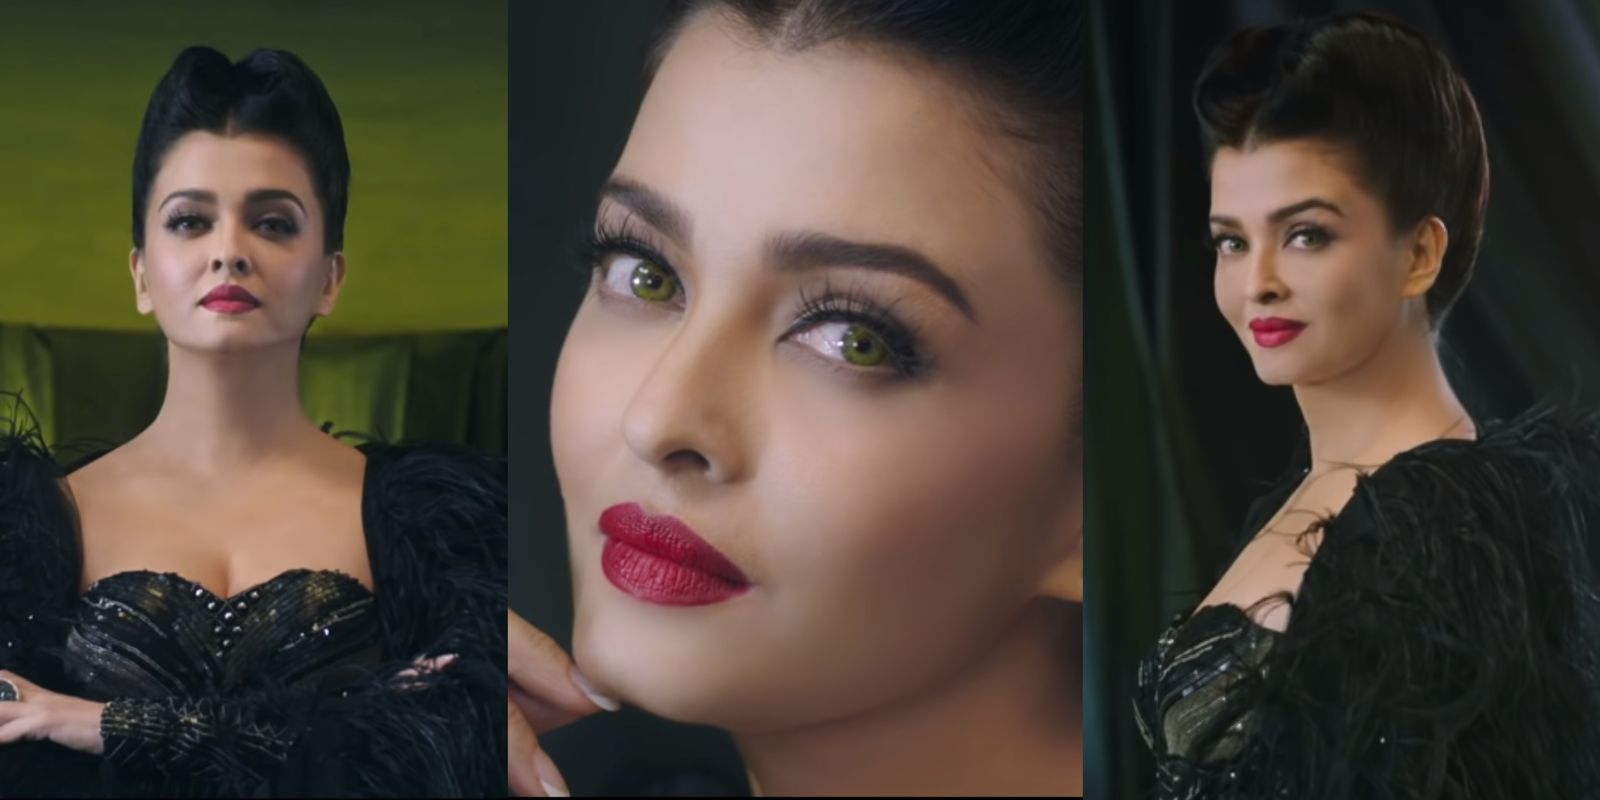 Aishawarya Rai Bachchan’s Look As Maleficent Would Make You Crave For A Hindi Remake Of The Same! Watch Video...